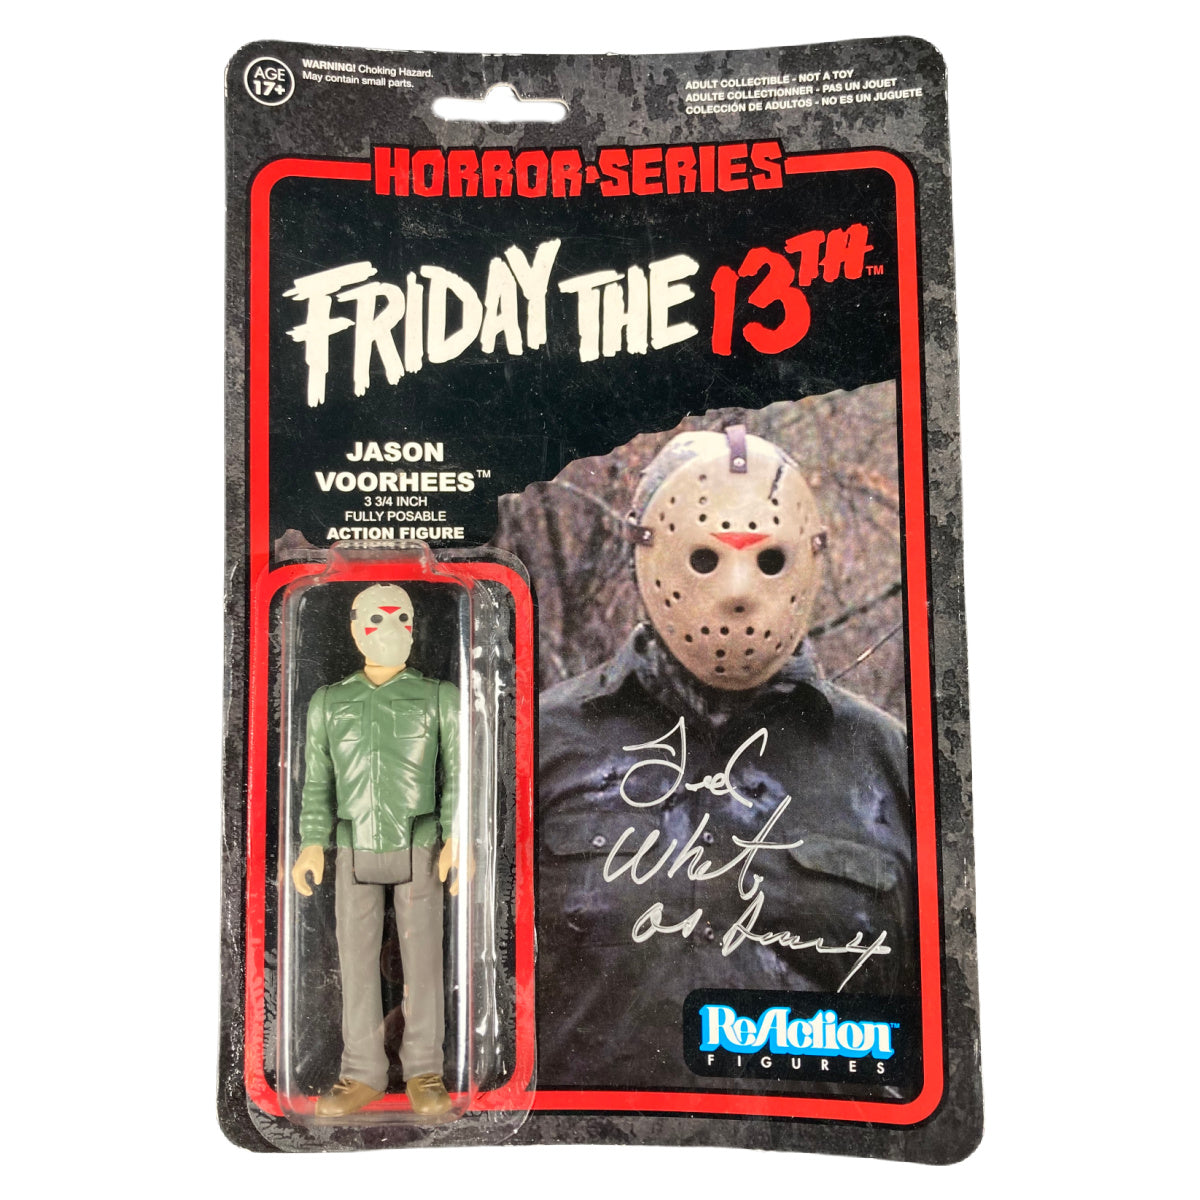 Ted White Signed ReAction Horror Series Figure Friday the 13th Jason Voorhees JSA COA